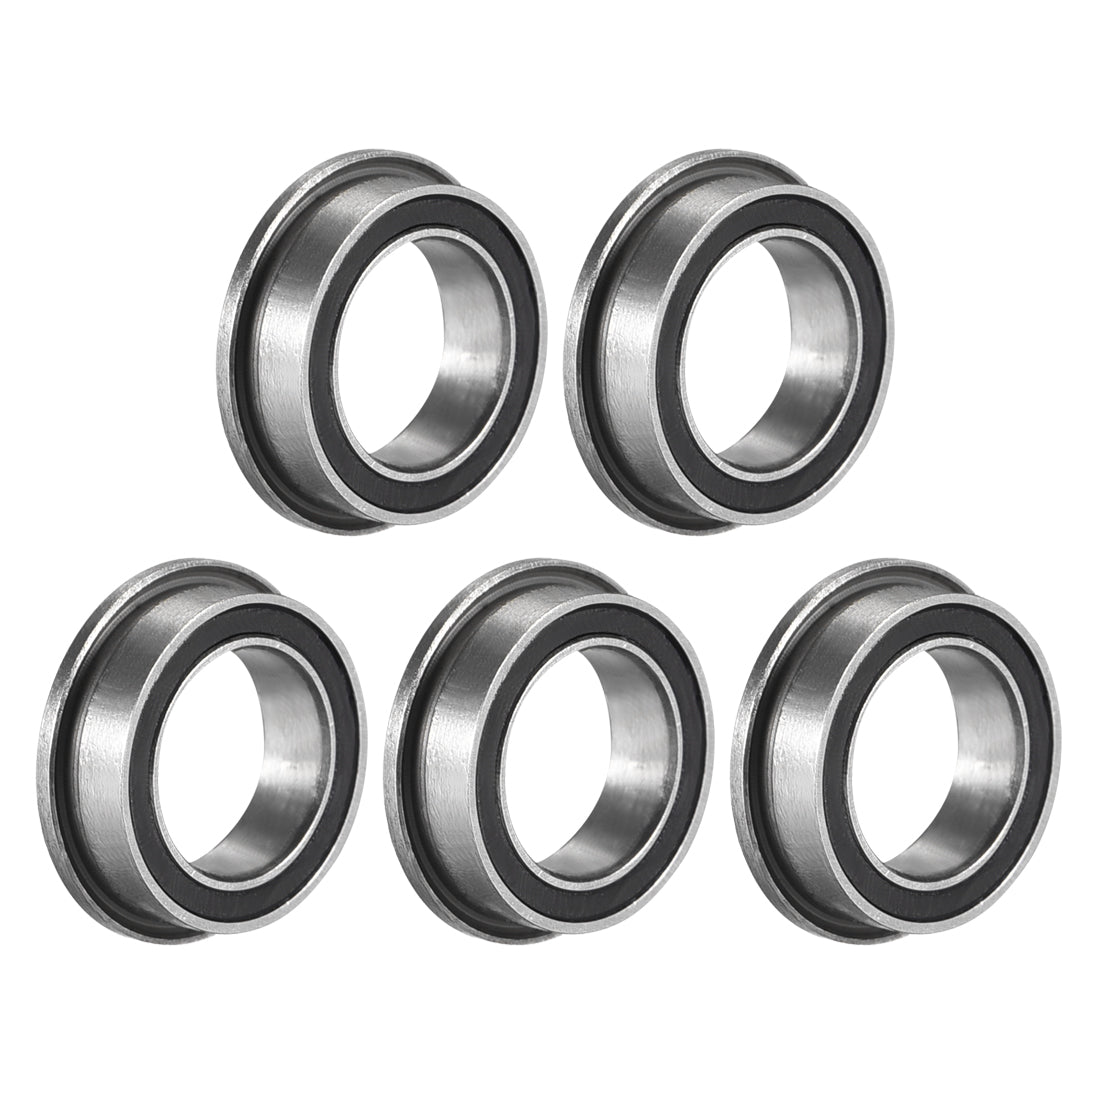 uxcell Uxcell MF128-2RS Flange Ball Bearing 8x12x3.5mm Sealed Chrome Steel Bearings 5pcs